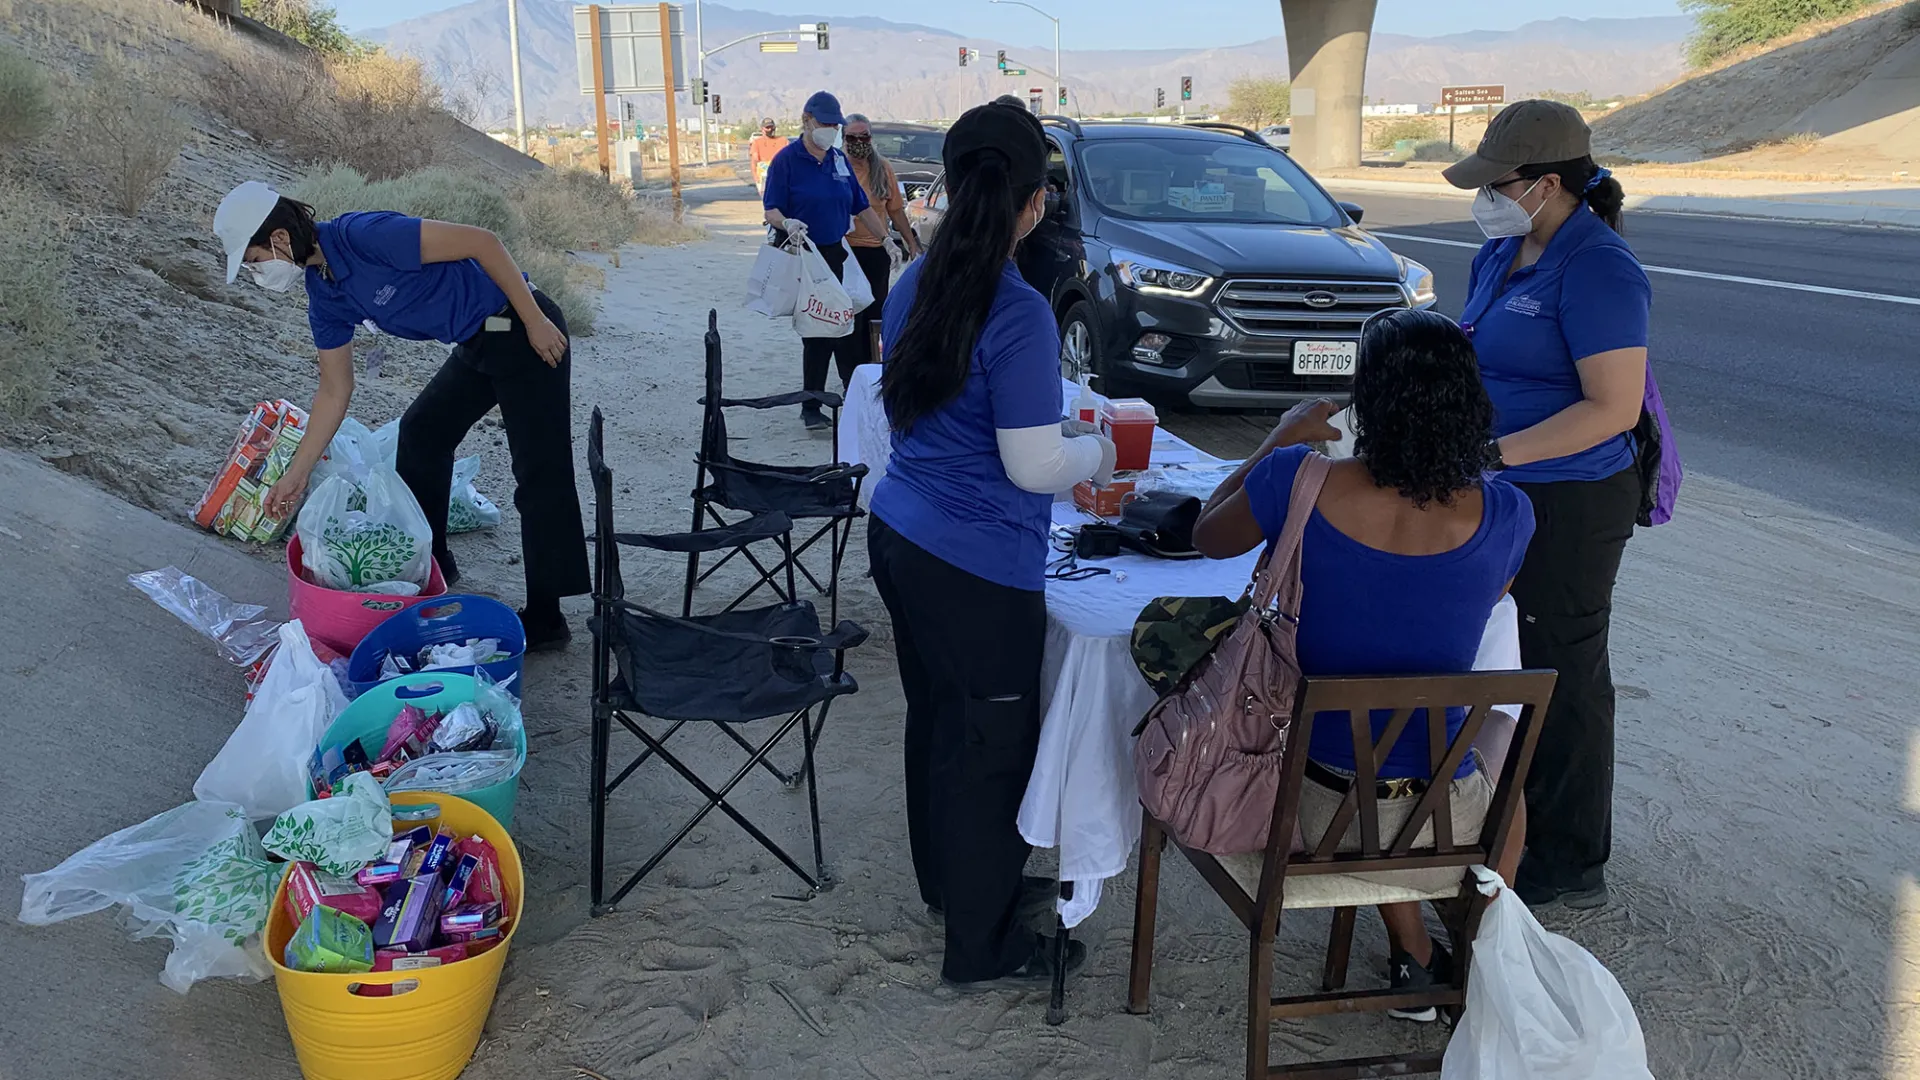 Students from the CSUSB Palm Desert Campus Nursing Street Medicine program assisting patients out in the field.